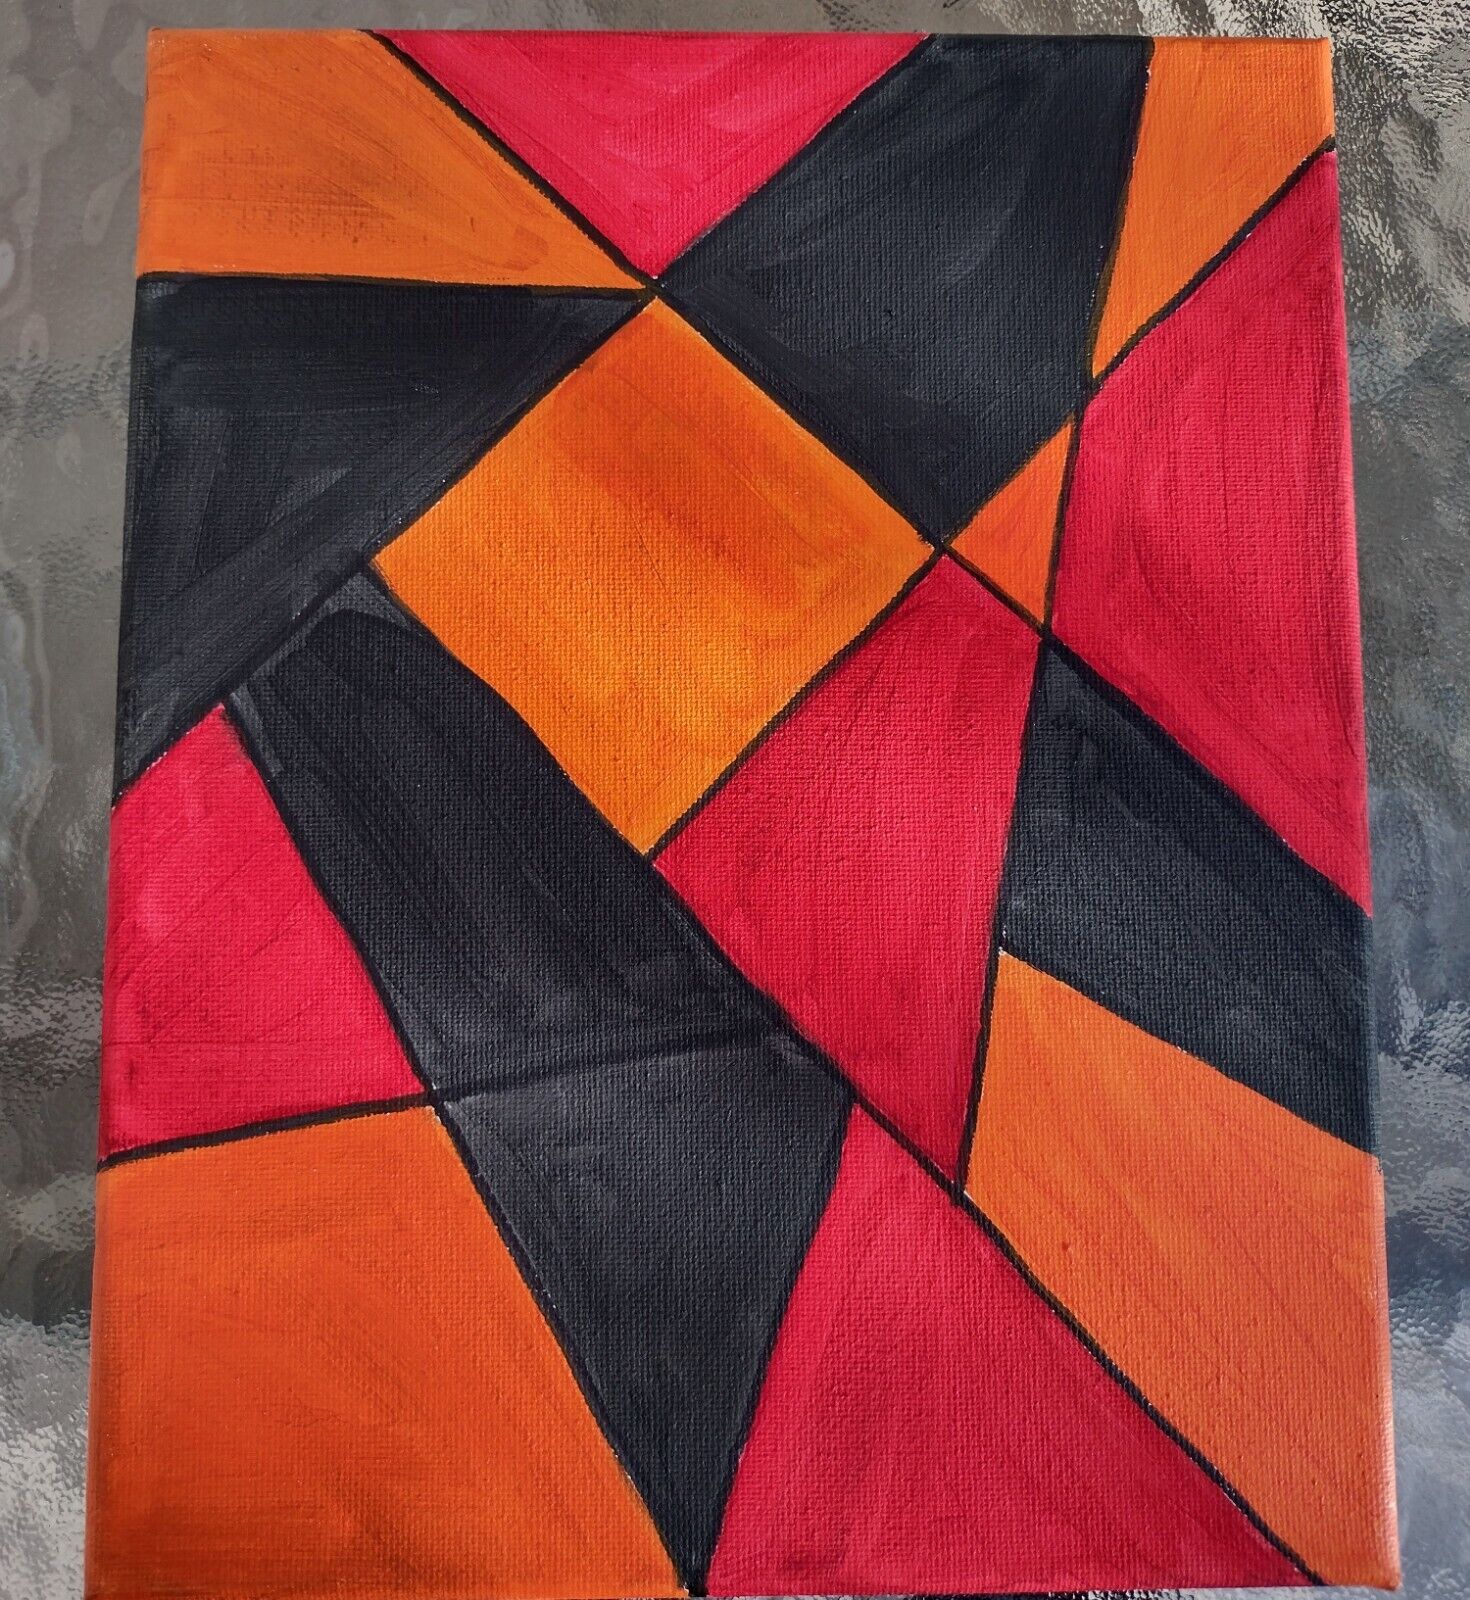 Handpainted Orange/Red Geometric Abstract Acrylic Painting On Canvas OOAK 8x10\